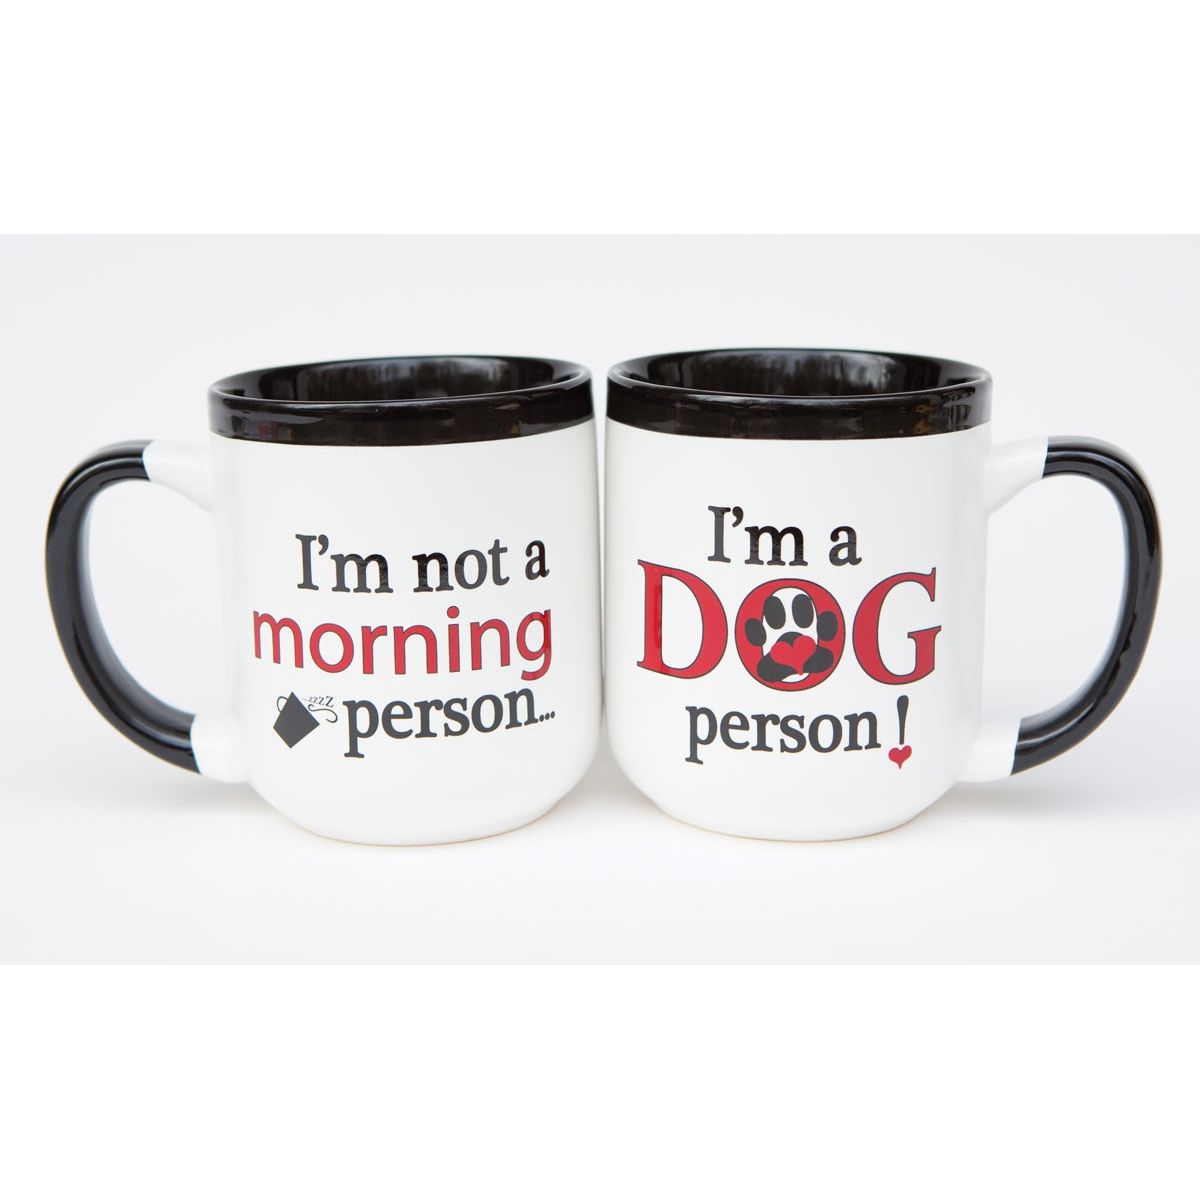 White ceramic mug with black handle and rim. &quot;I&#39;m not a morning person&quot; on front and &quot;I&#39;m a DOG Person&quot; on back.